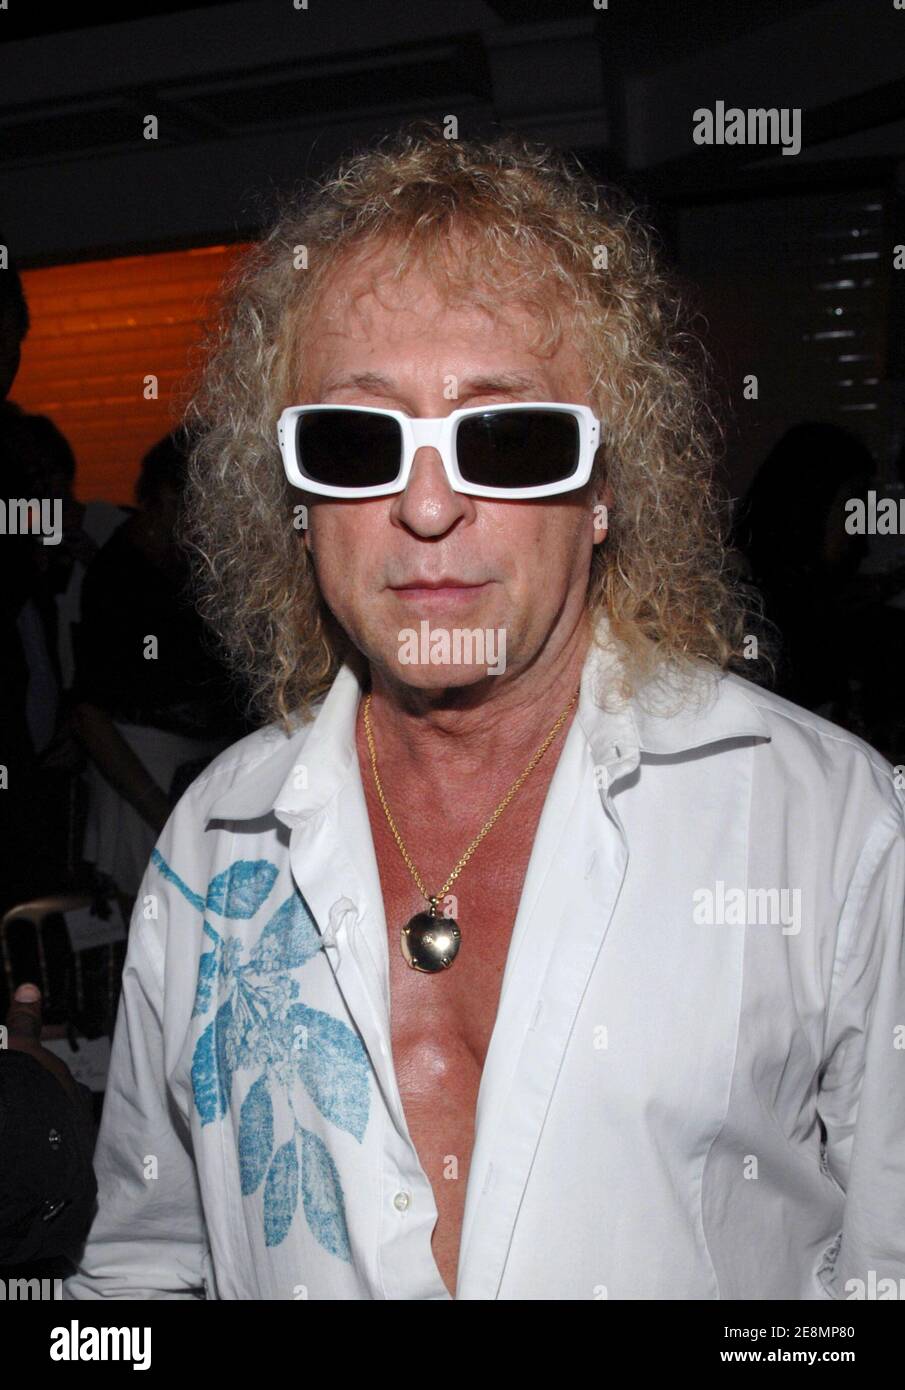 Michel Polnareff attends Jean-Paul Gaultier's Fall-Winter 2007-2008 'Haute  Couture' collection presentation in Paris, France, on July 4, 2007. Photo  by Khayat-Orban/ABACAPRESS.COM Stock Photo - Alamy